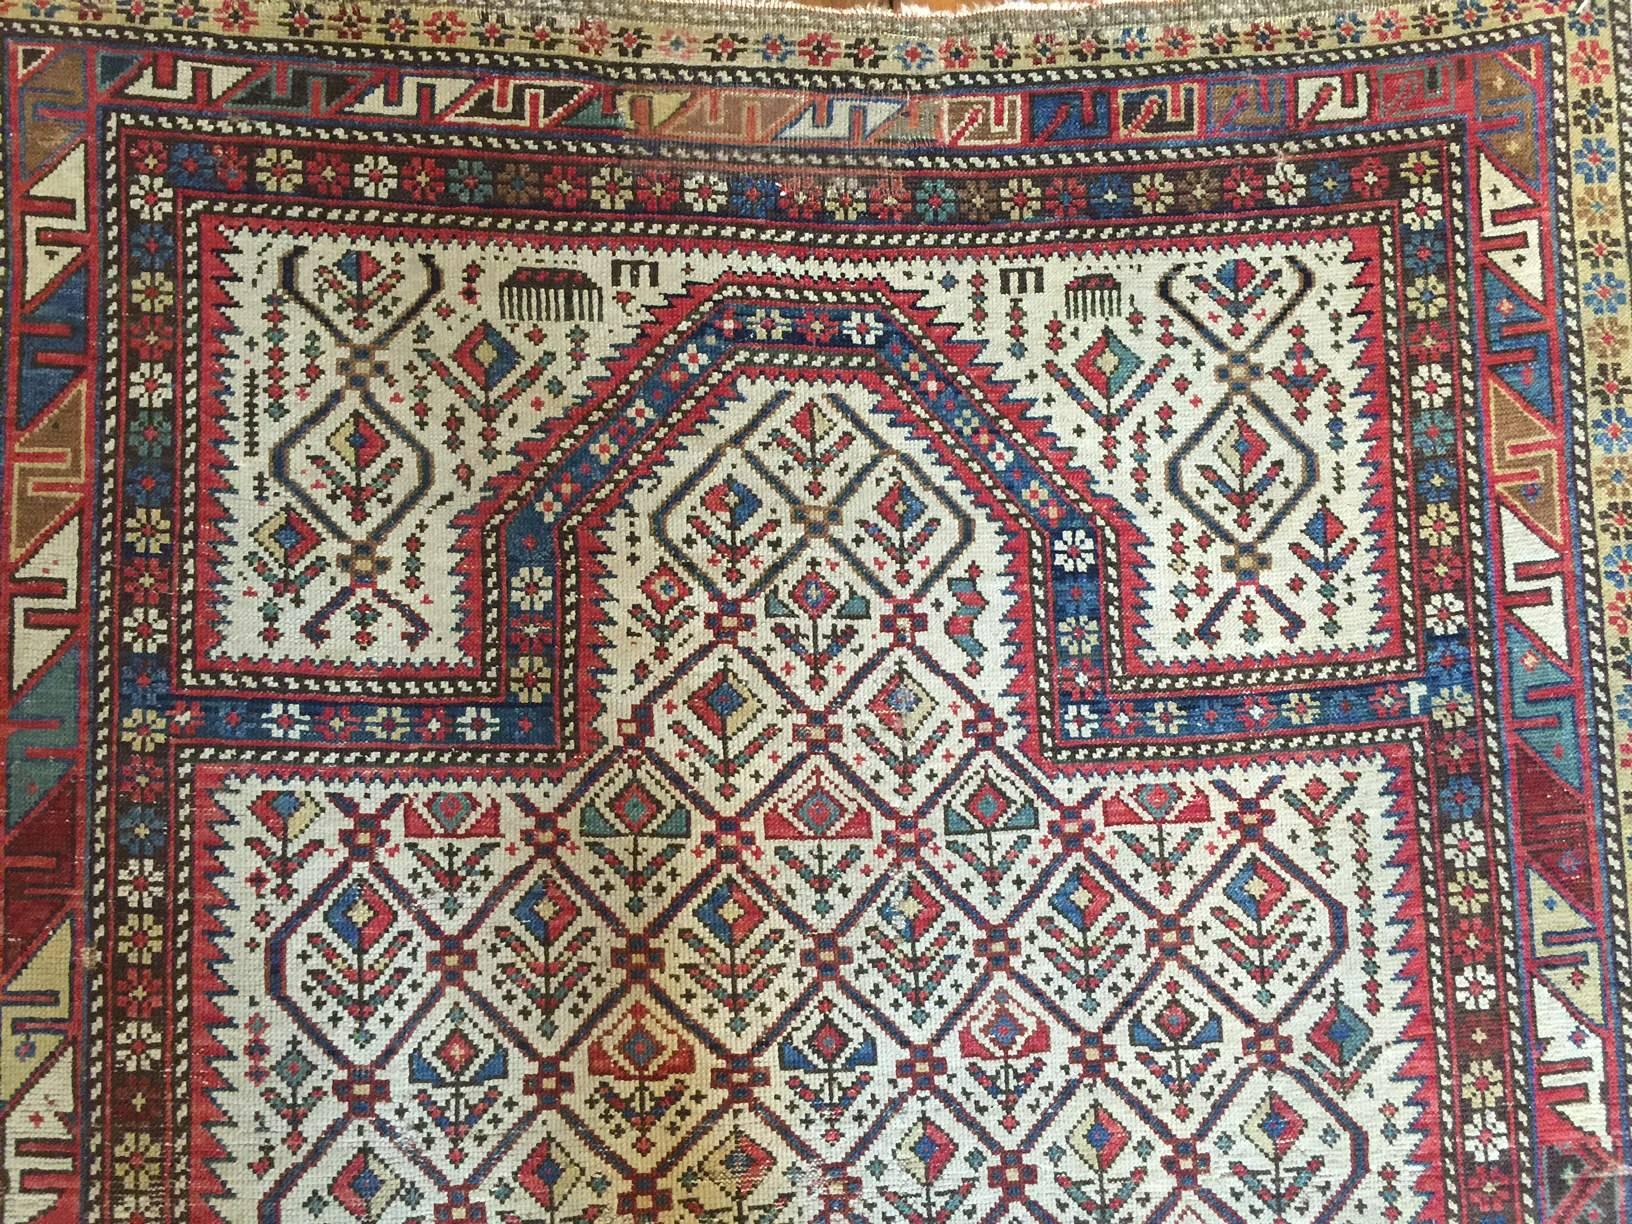 A late 19th century Persian prayer rug with a sweet all-over multicolored floral pattern on a white background surrounded by two beautiful borders. One border is a petite floral pattern, and the other is a geometric 